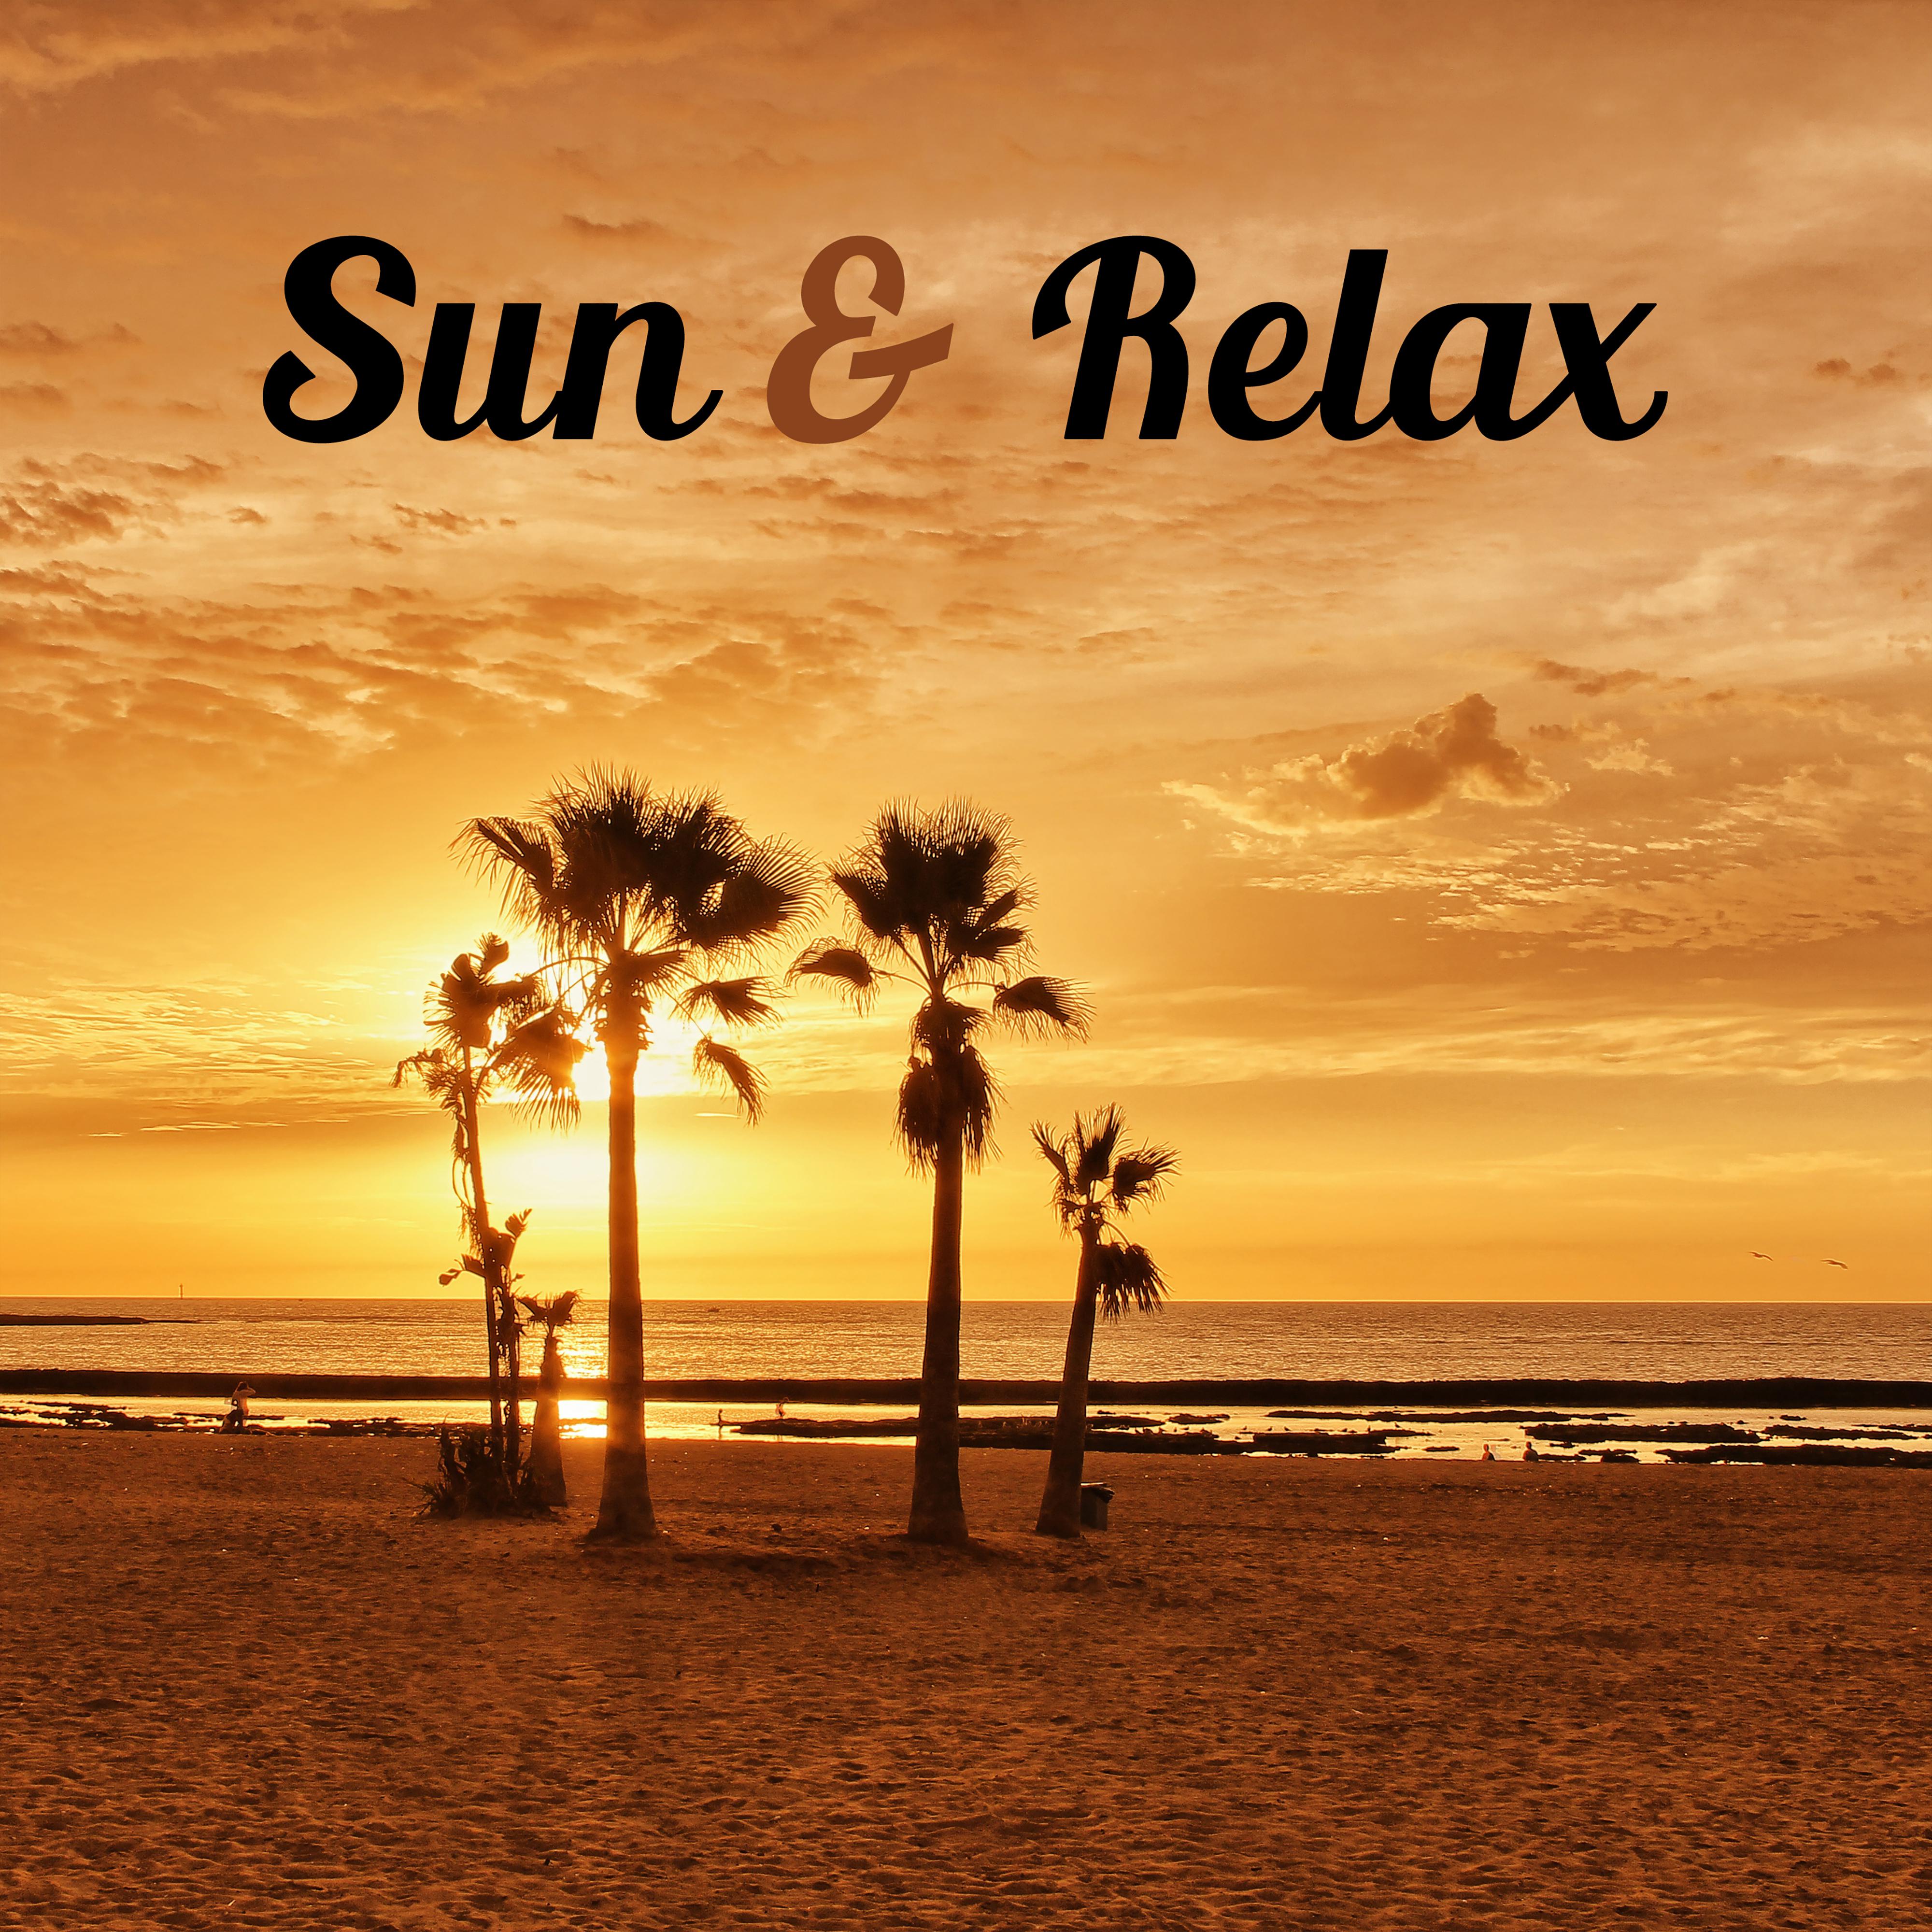 Sun  Relax  Chillout Music, Ibiza Lounge, Deep Meditation, Summertime, Relax on the Beach, Relaxation Songs